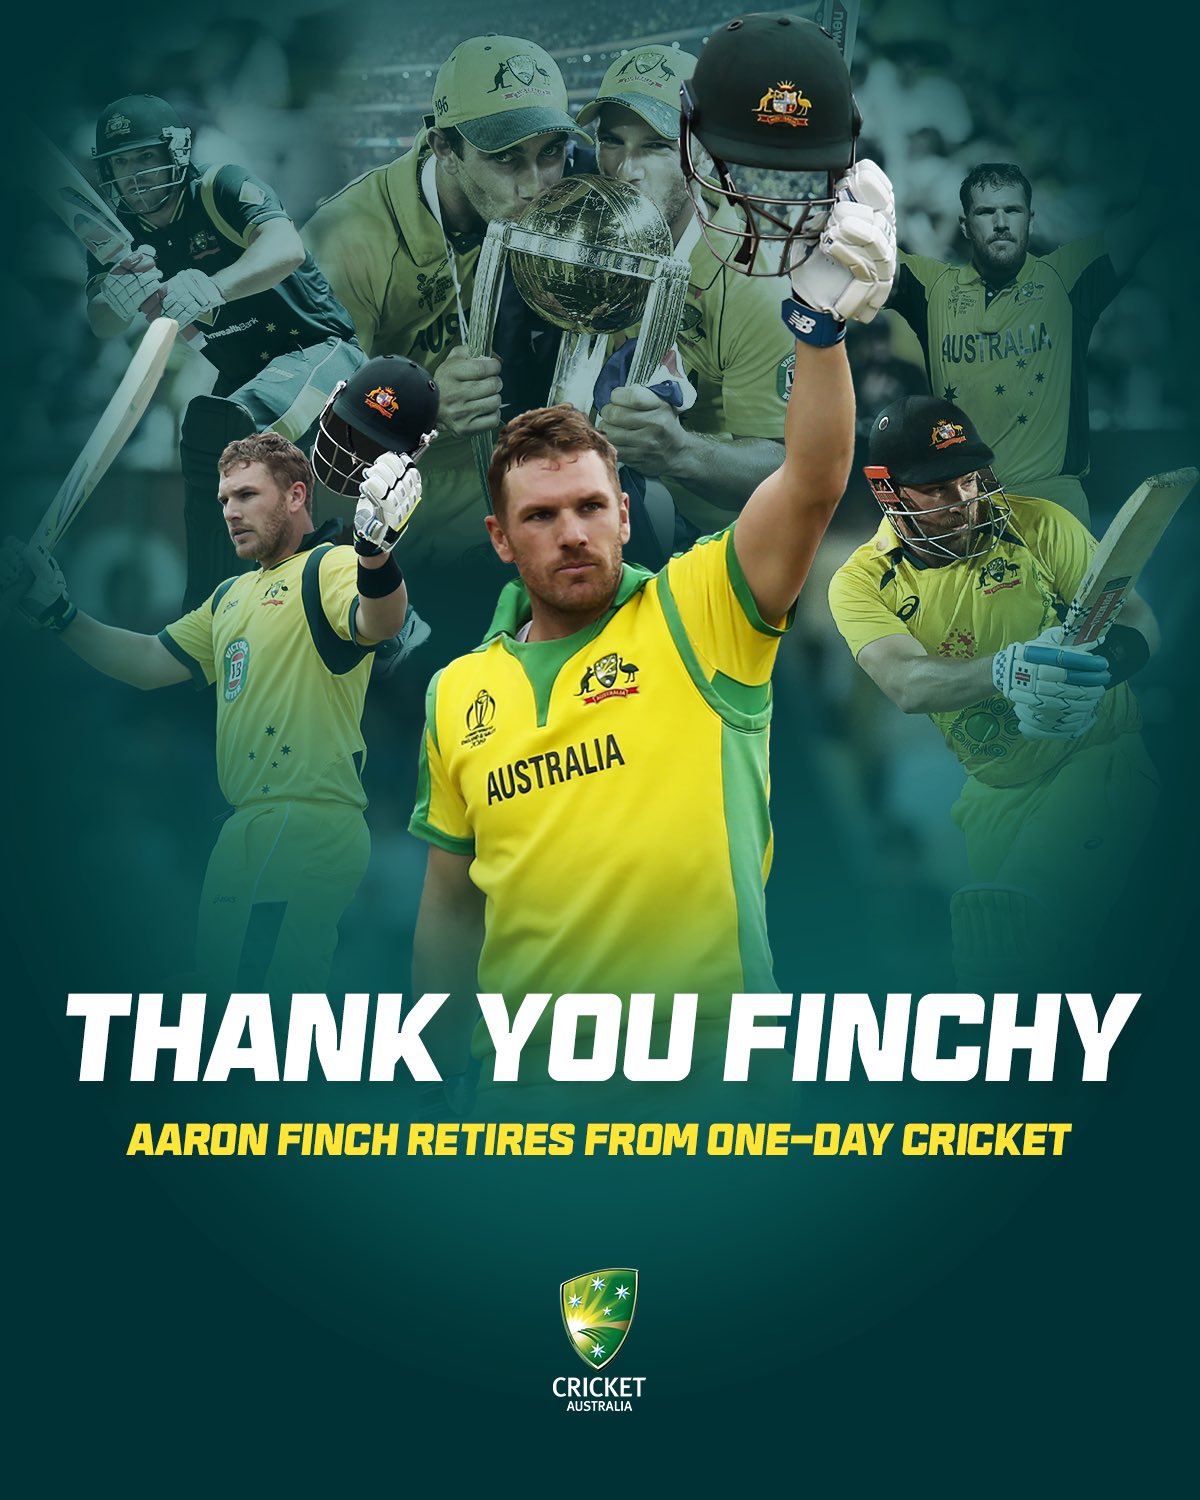 Cricket Australia True Champion Of The White Ball Game. Aaron Finch Will Retire From One Day Cricket After Tomorrow's Third And Final Dettol ODI Vs New Zealand, With Focus Shifting To